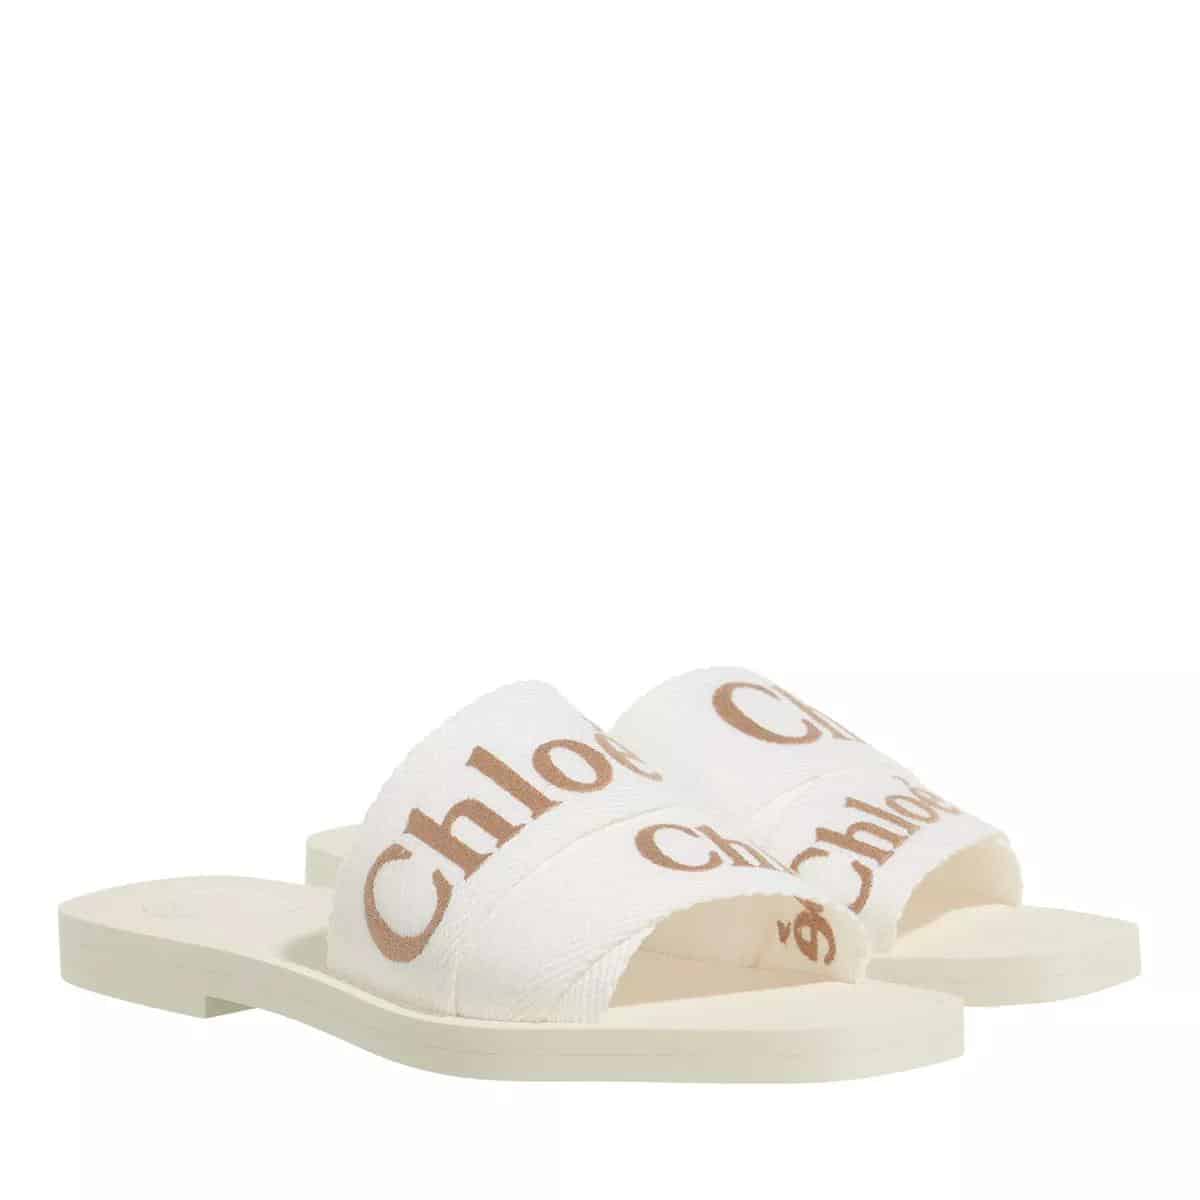 Chloé Slippers - Woody Flat Mules in crème